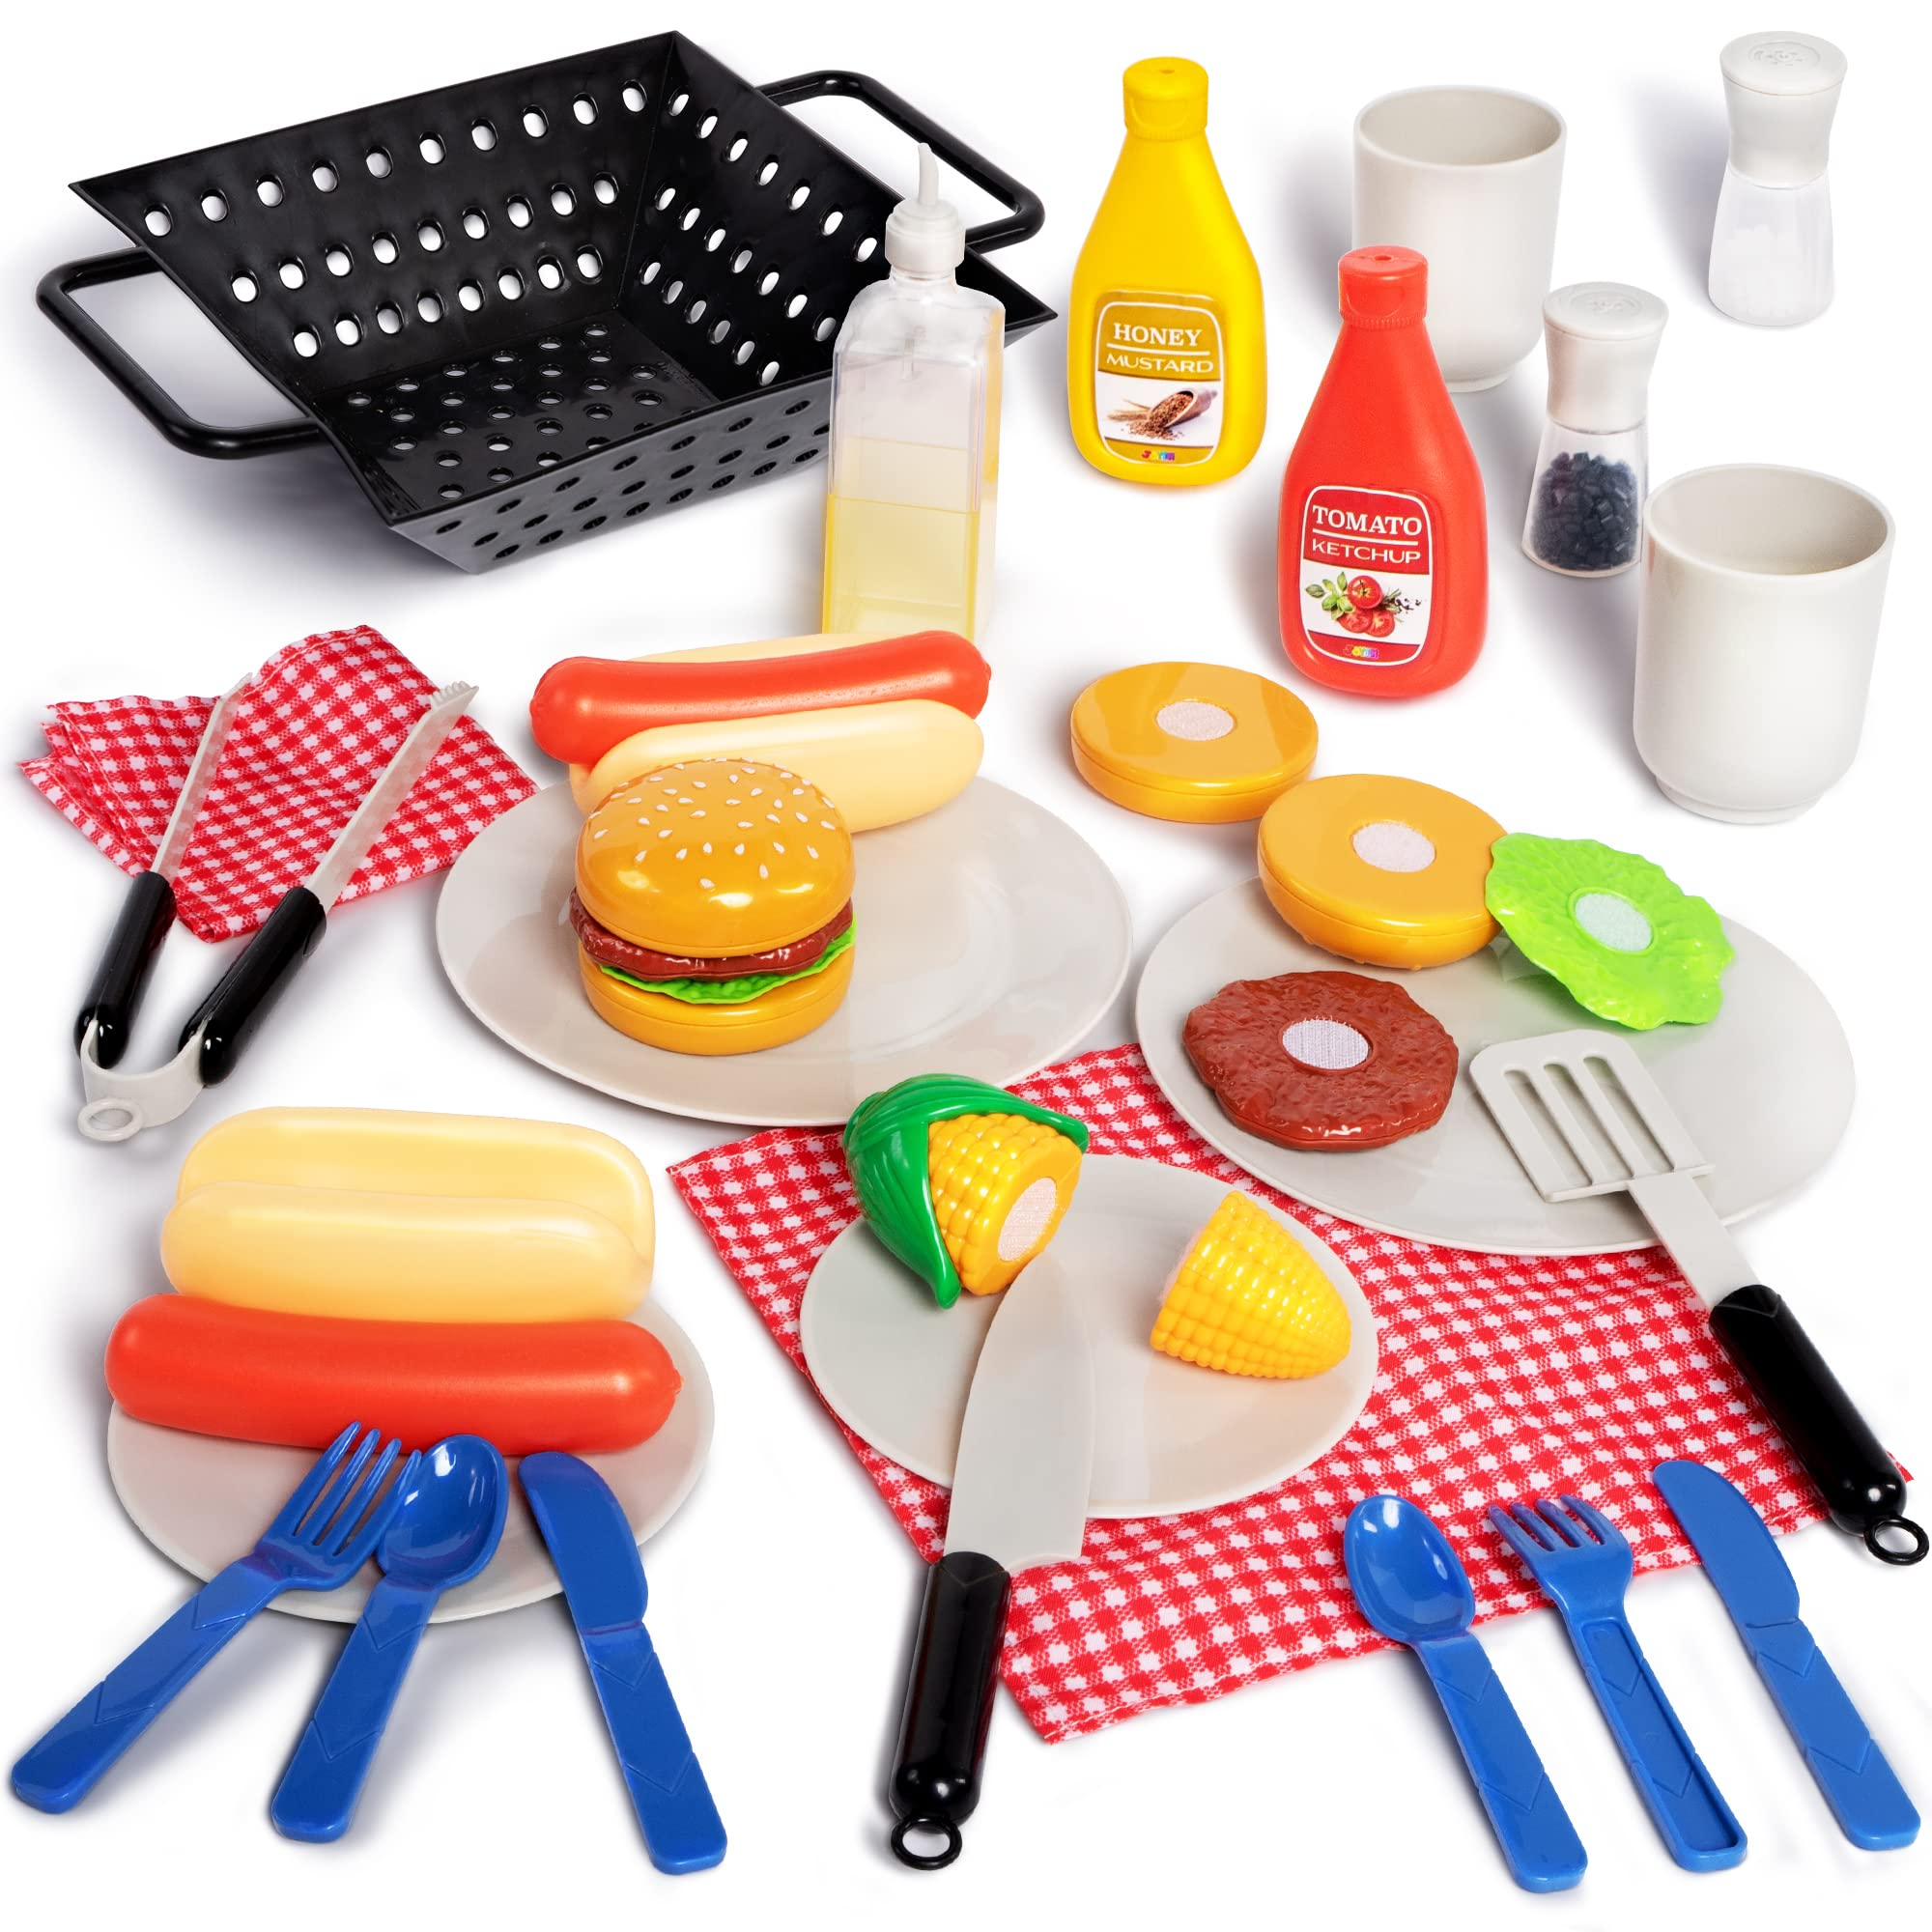 Barbecue Food and Accessories Toy Set